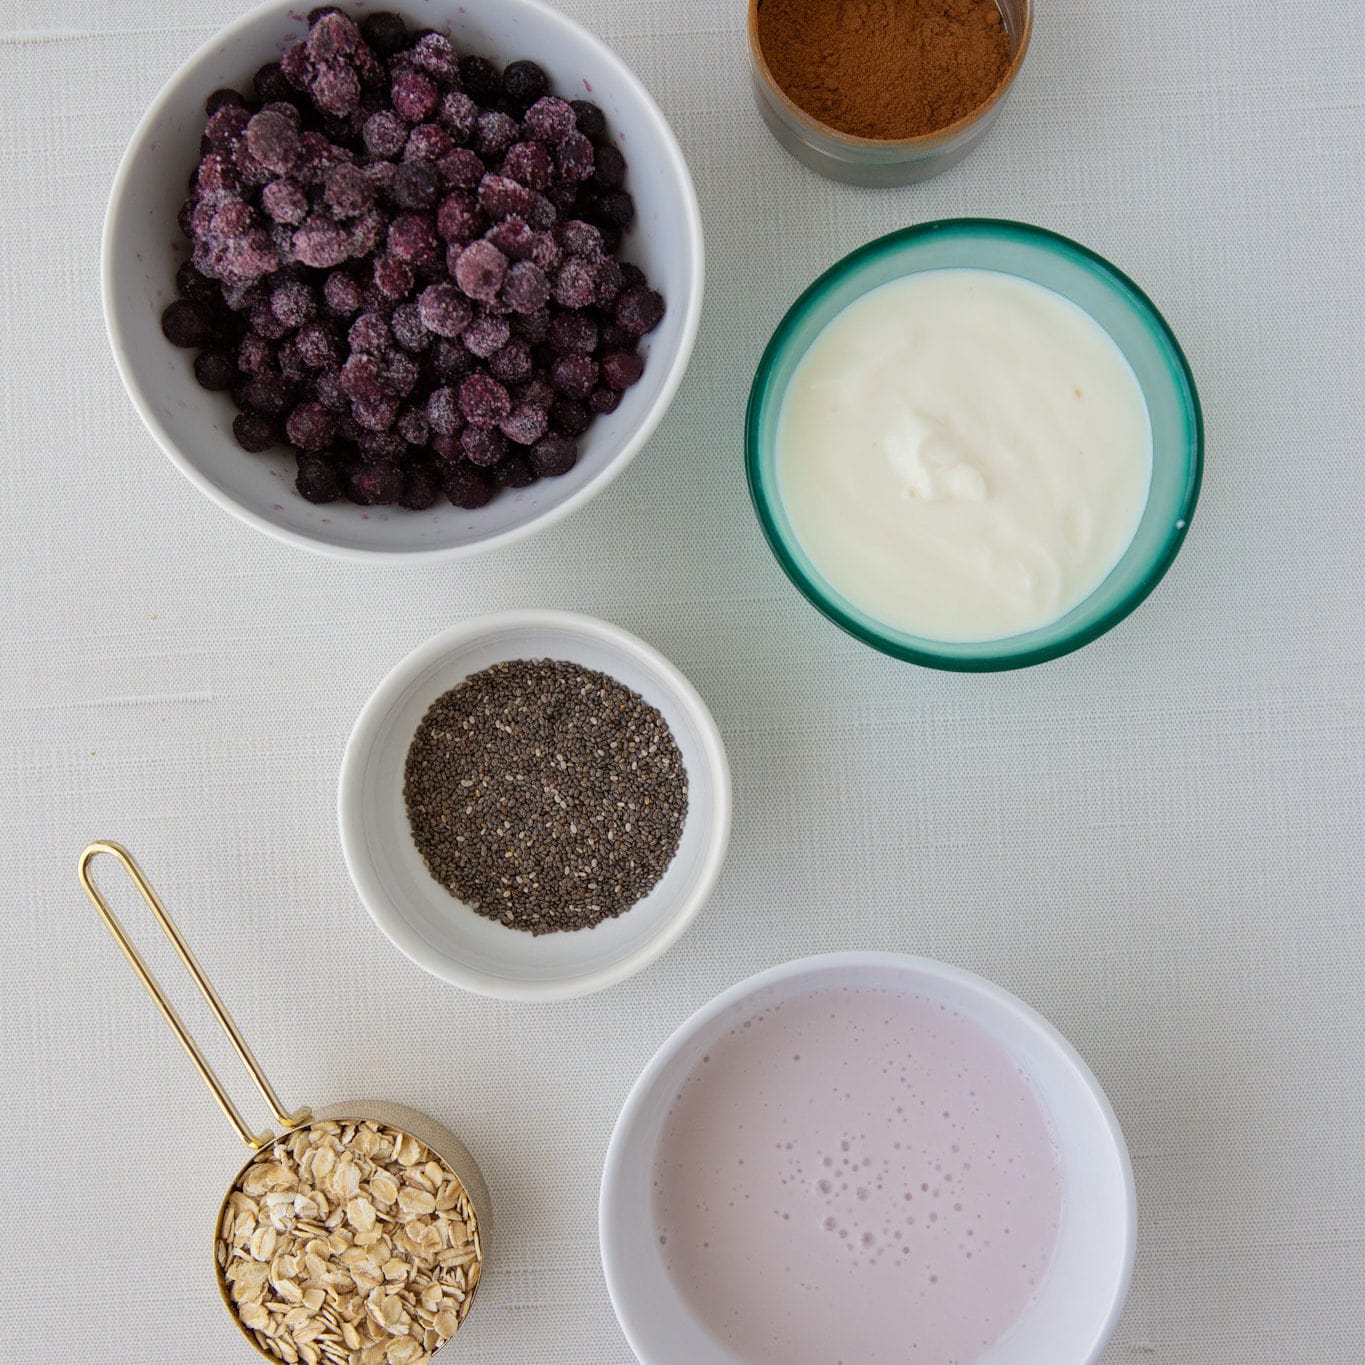 blueberry vanilla overnight oats overheard shot of ingredients including milk, frozen blueberries, chia seeds, old fashioned oats, greek yogurt, and flaxseed.